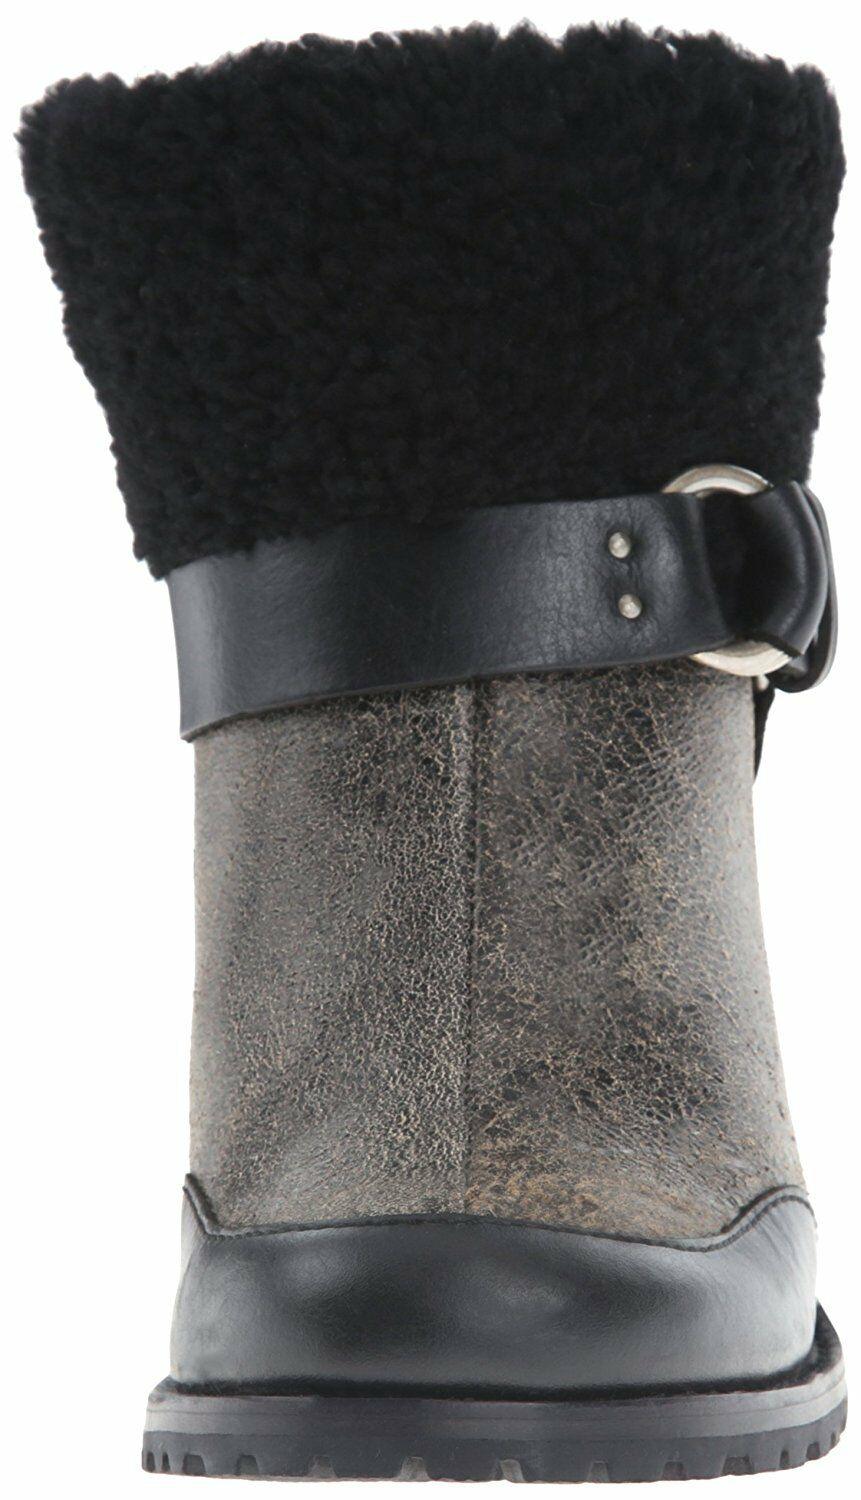 Woolrich Miss Alice Harness Boot Booties Black Crackle Leather Women's Sz 6 M - SVNYFancy